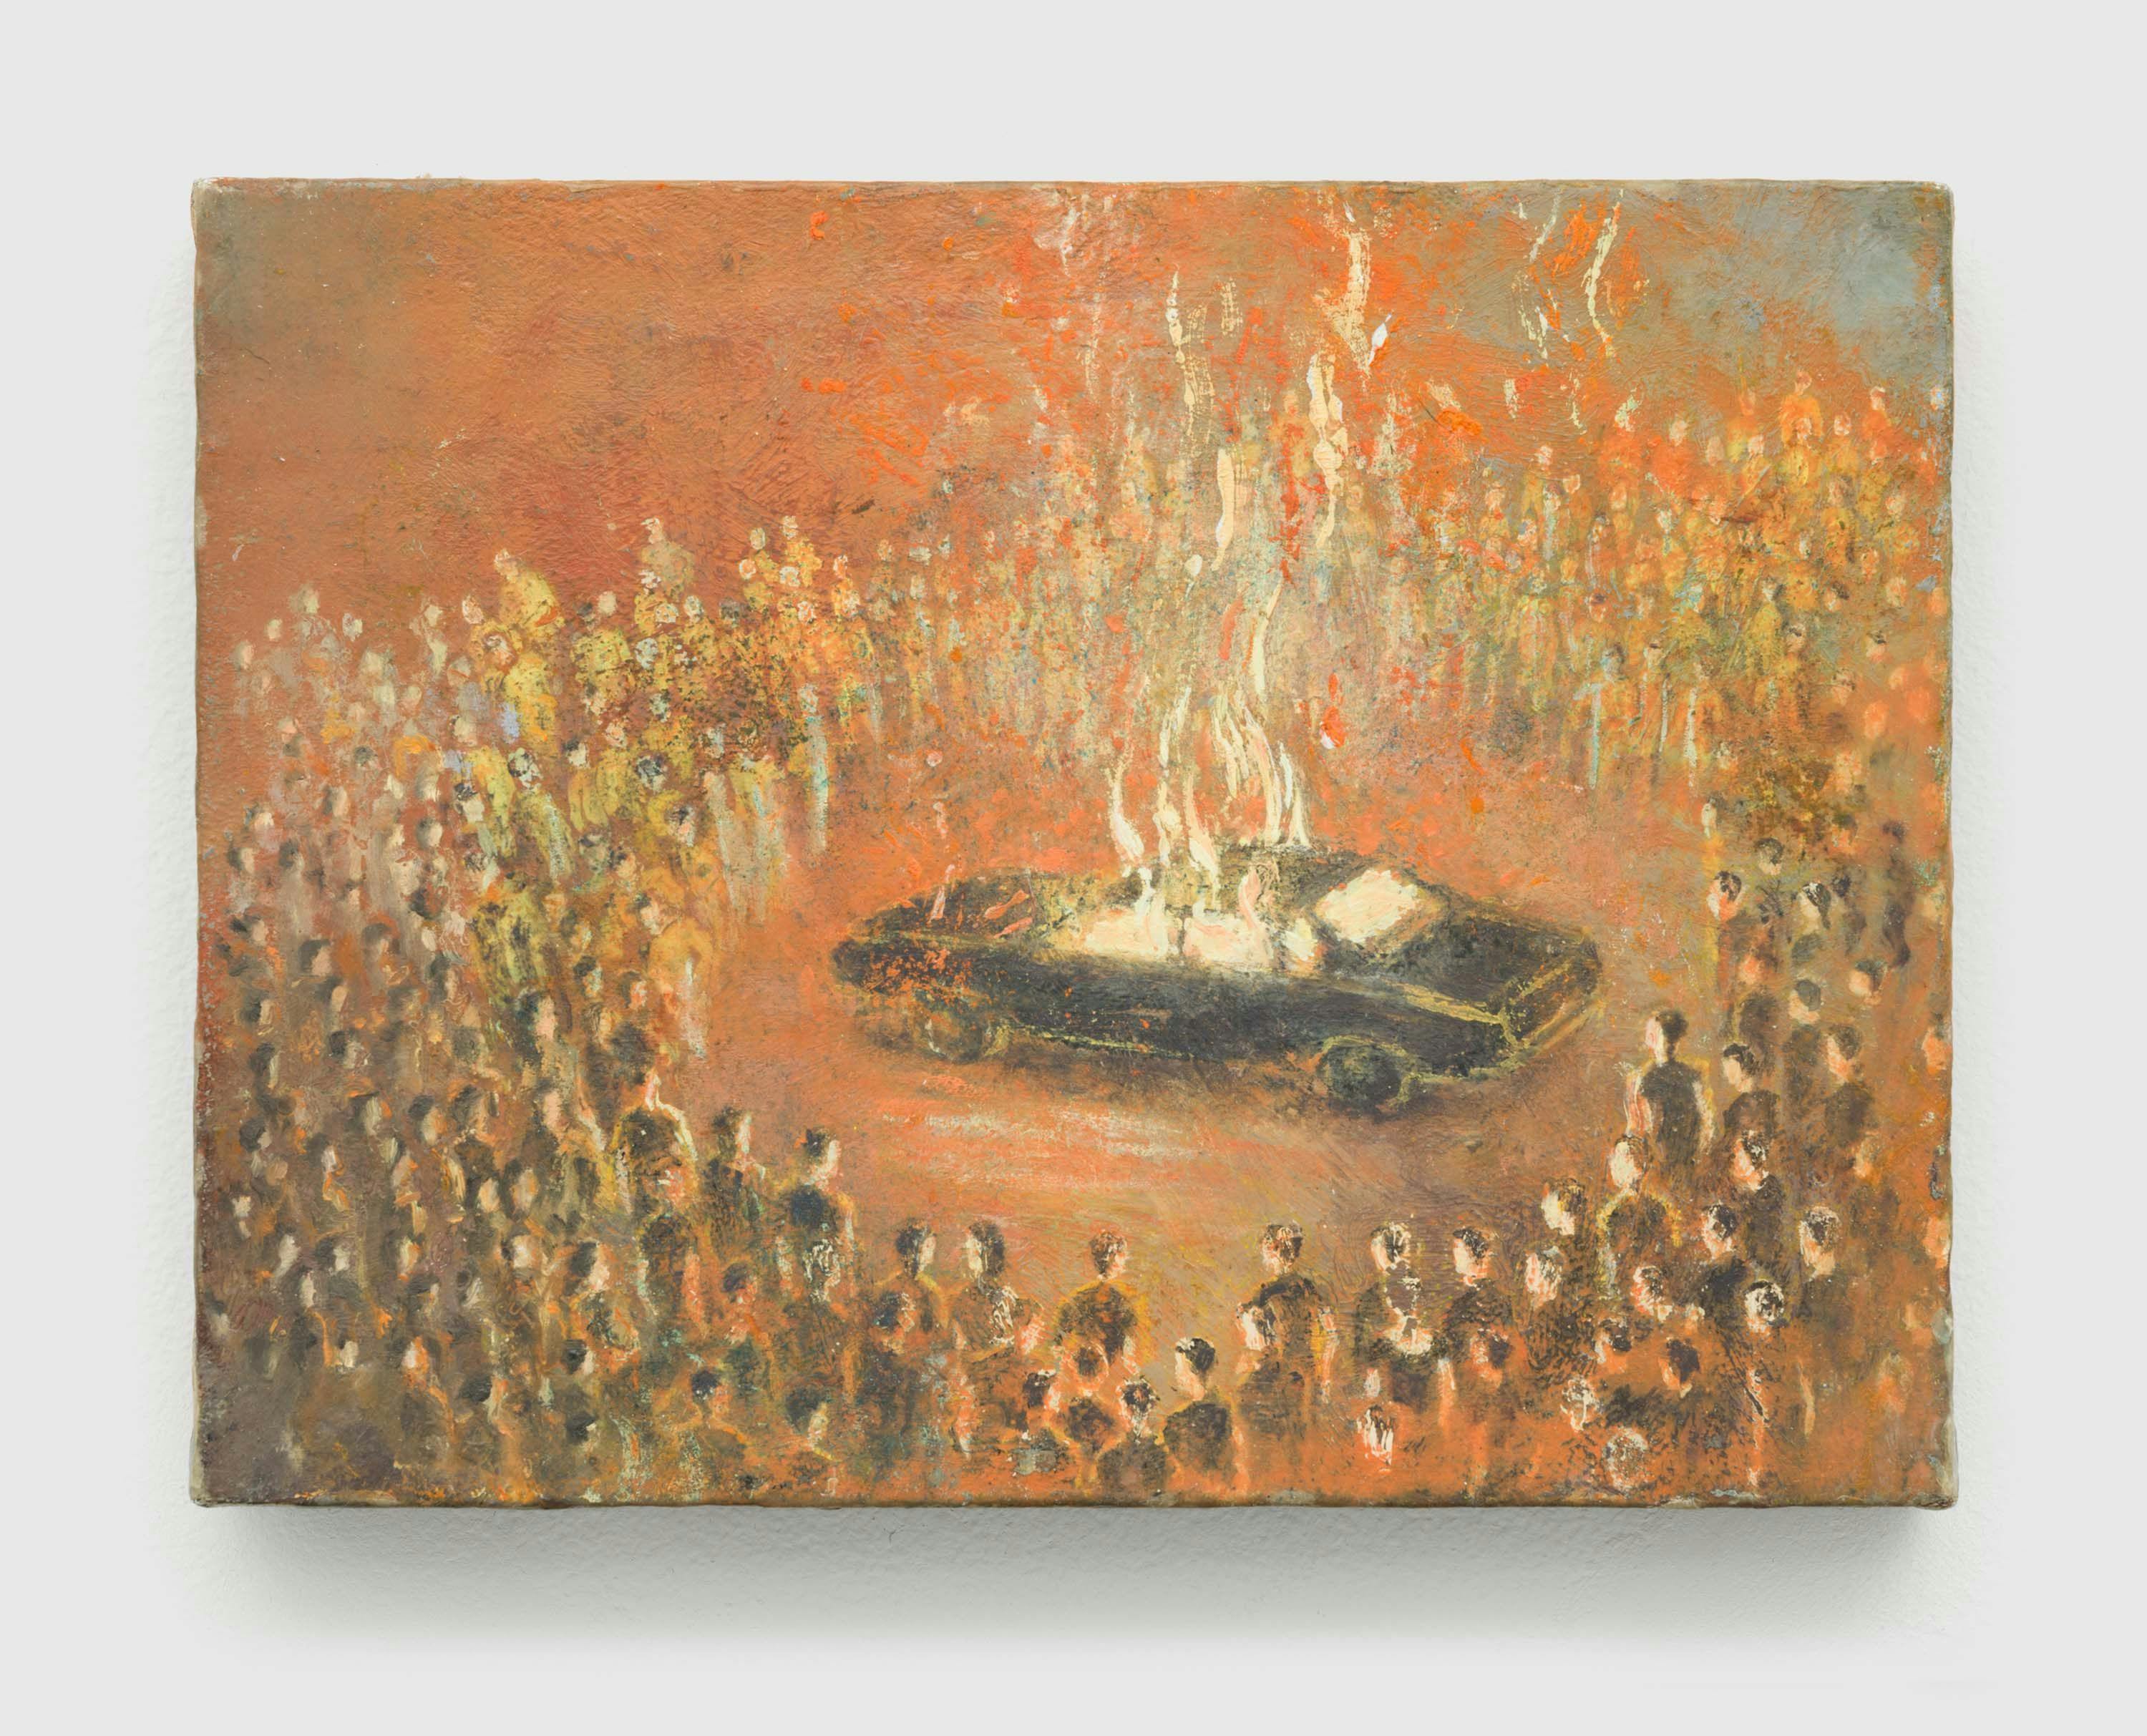 A painting by Francis Alÿs, titled Linchados, dated 2010.